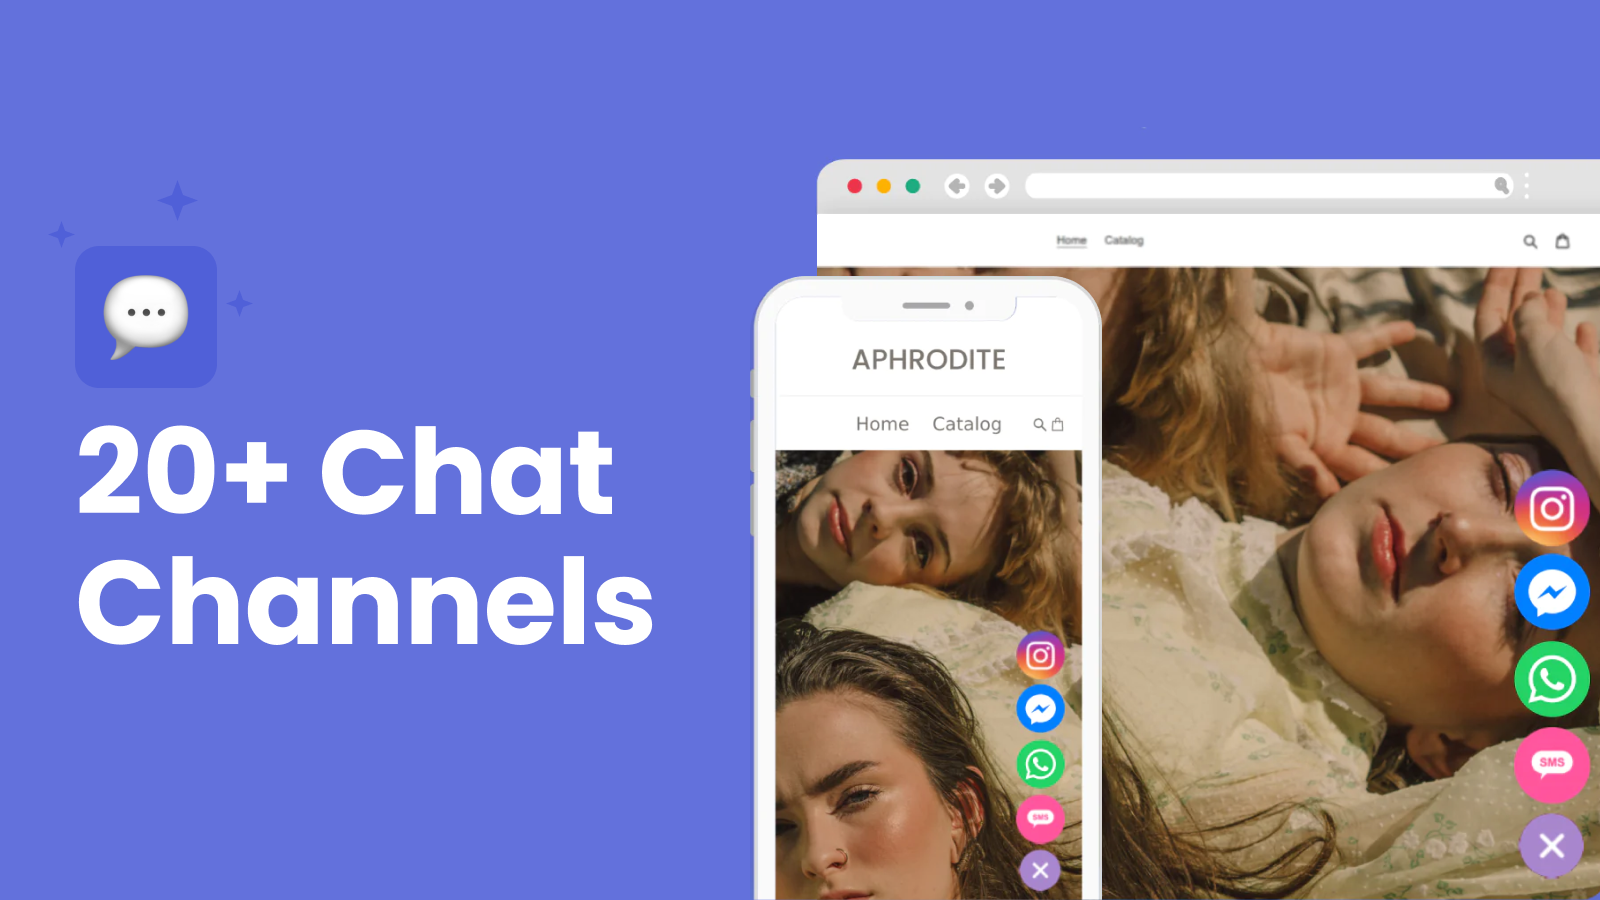 Add as many chat channels as you want to your chat widget